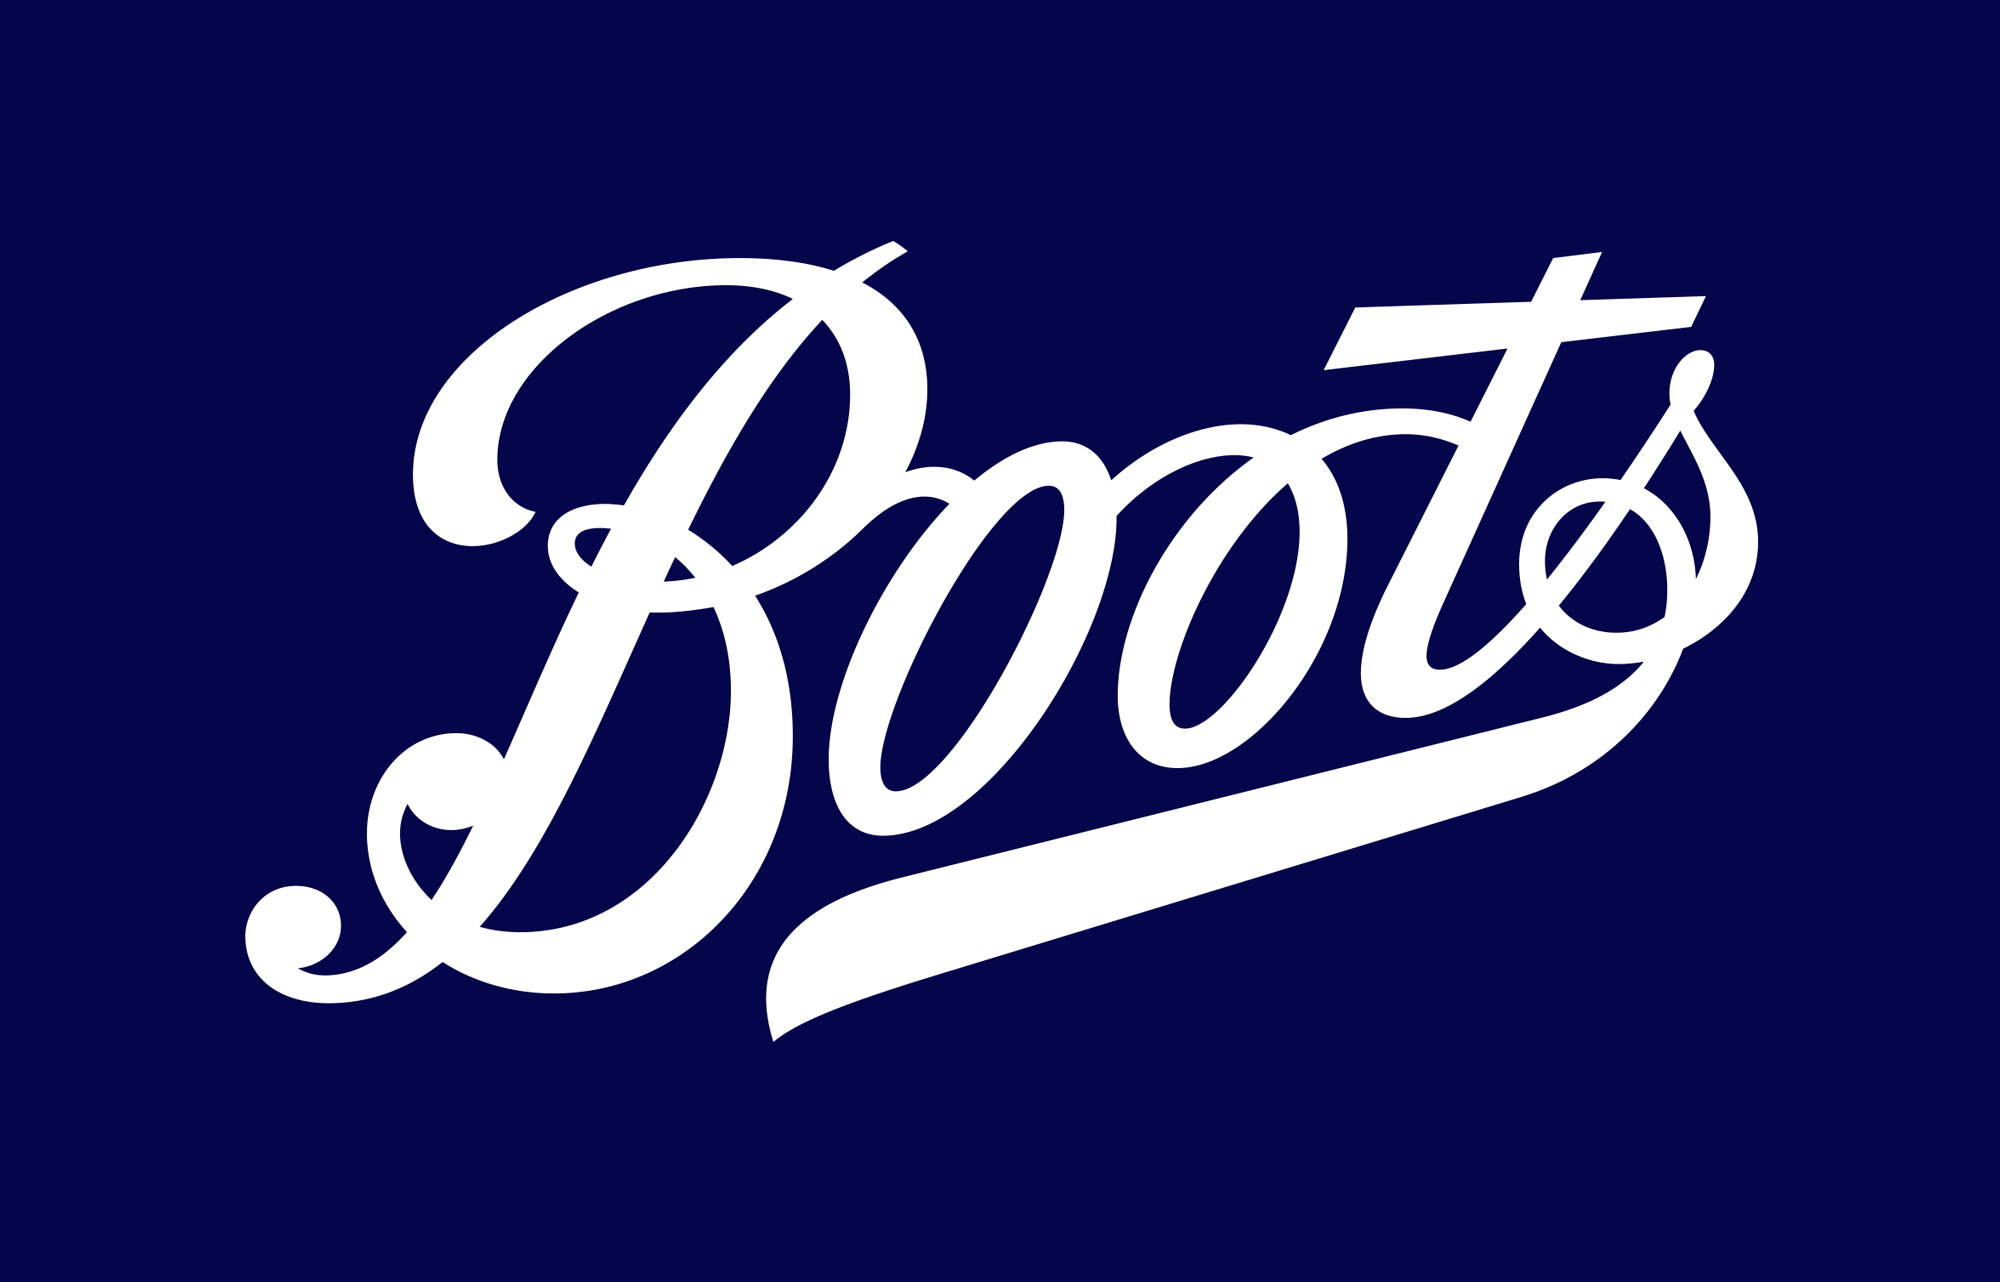 Boots Logo - Brand New: New Logo and Identity for Boots UK by Coley Porter Bell